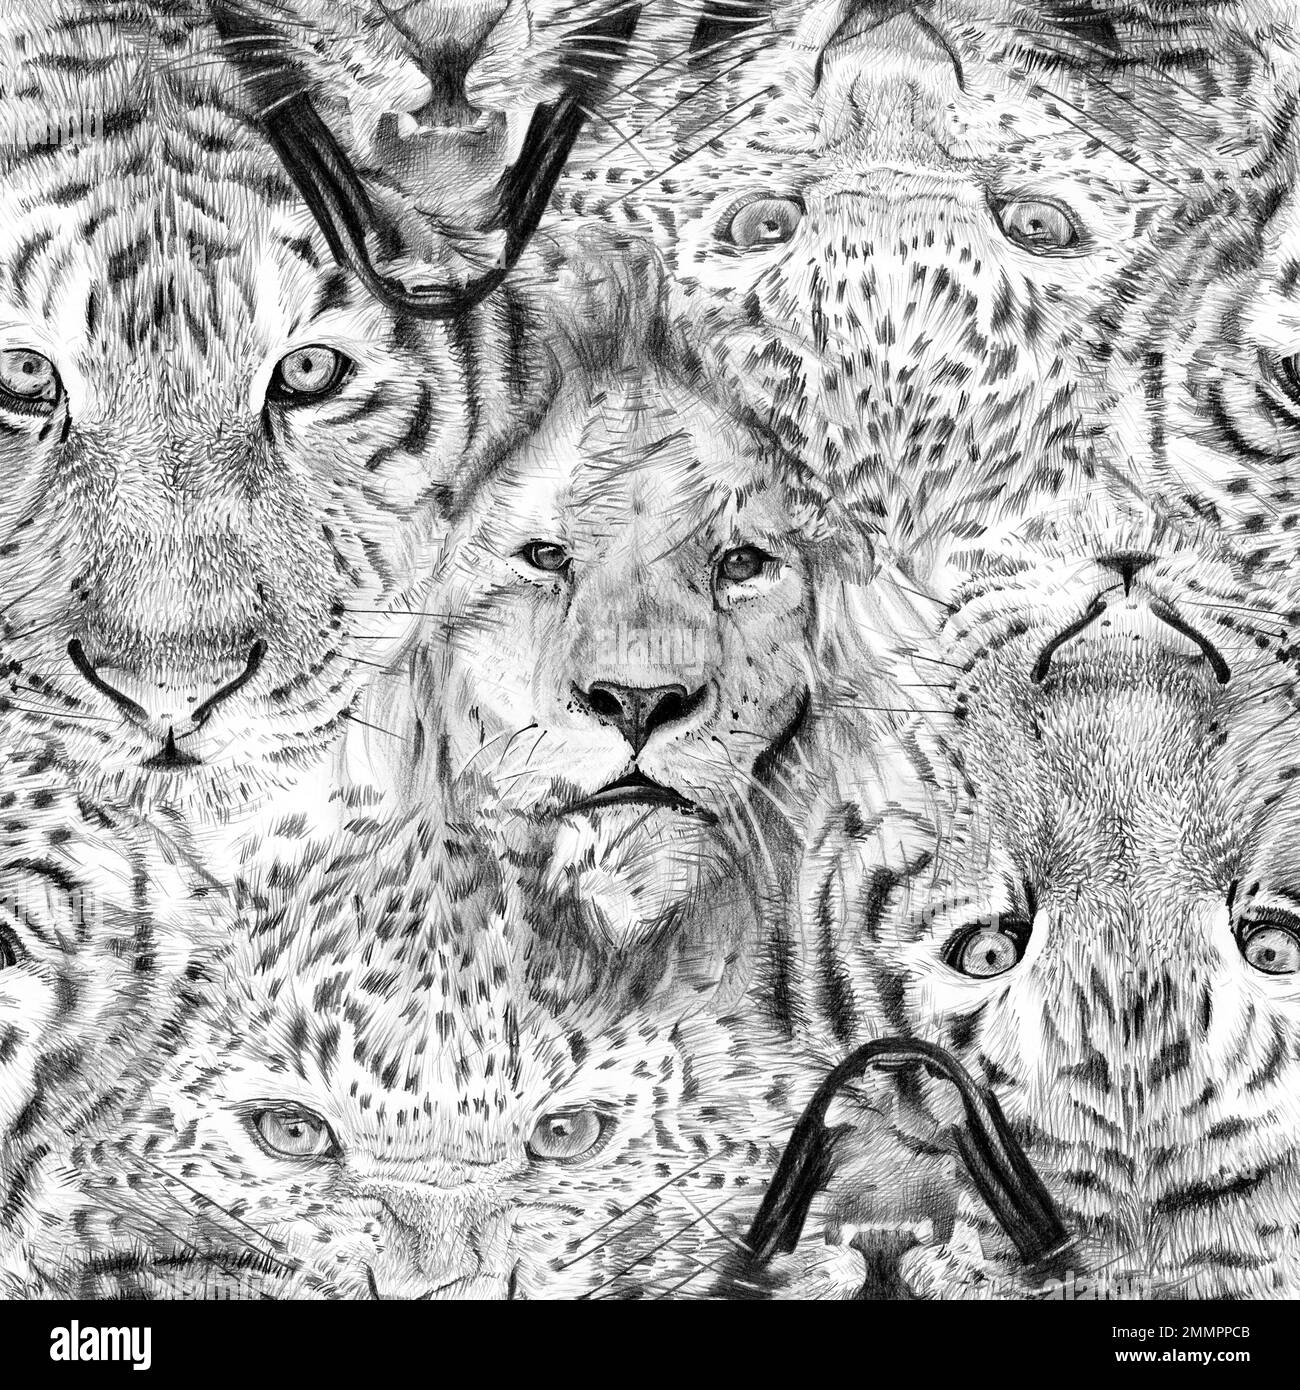 Seamless pattern of hand drawn sketch african animal portraits. Illustration isolated on white background Stock Photo